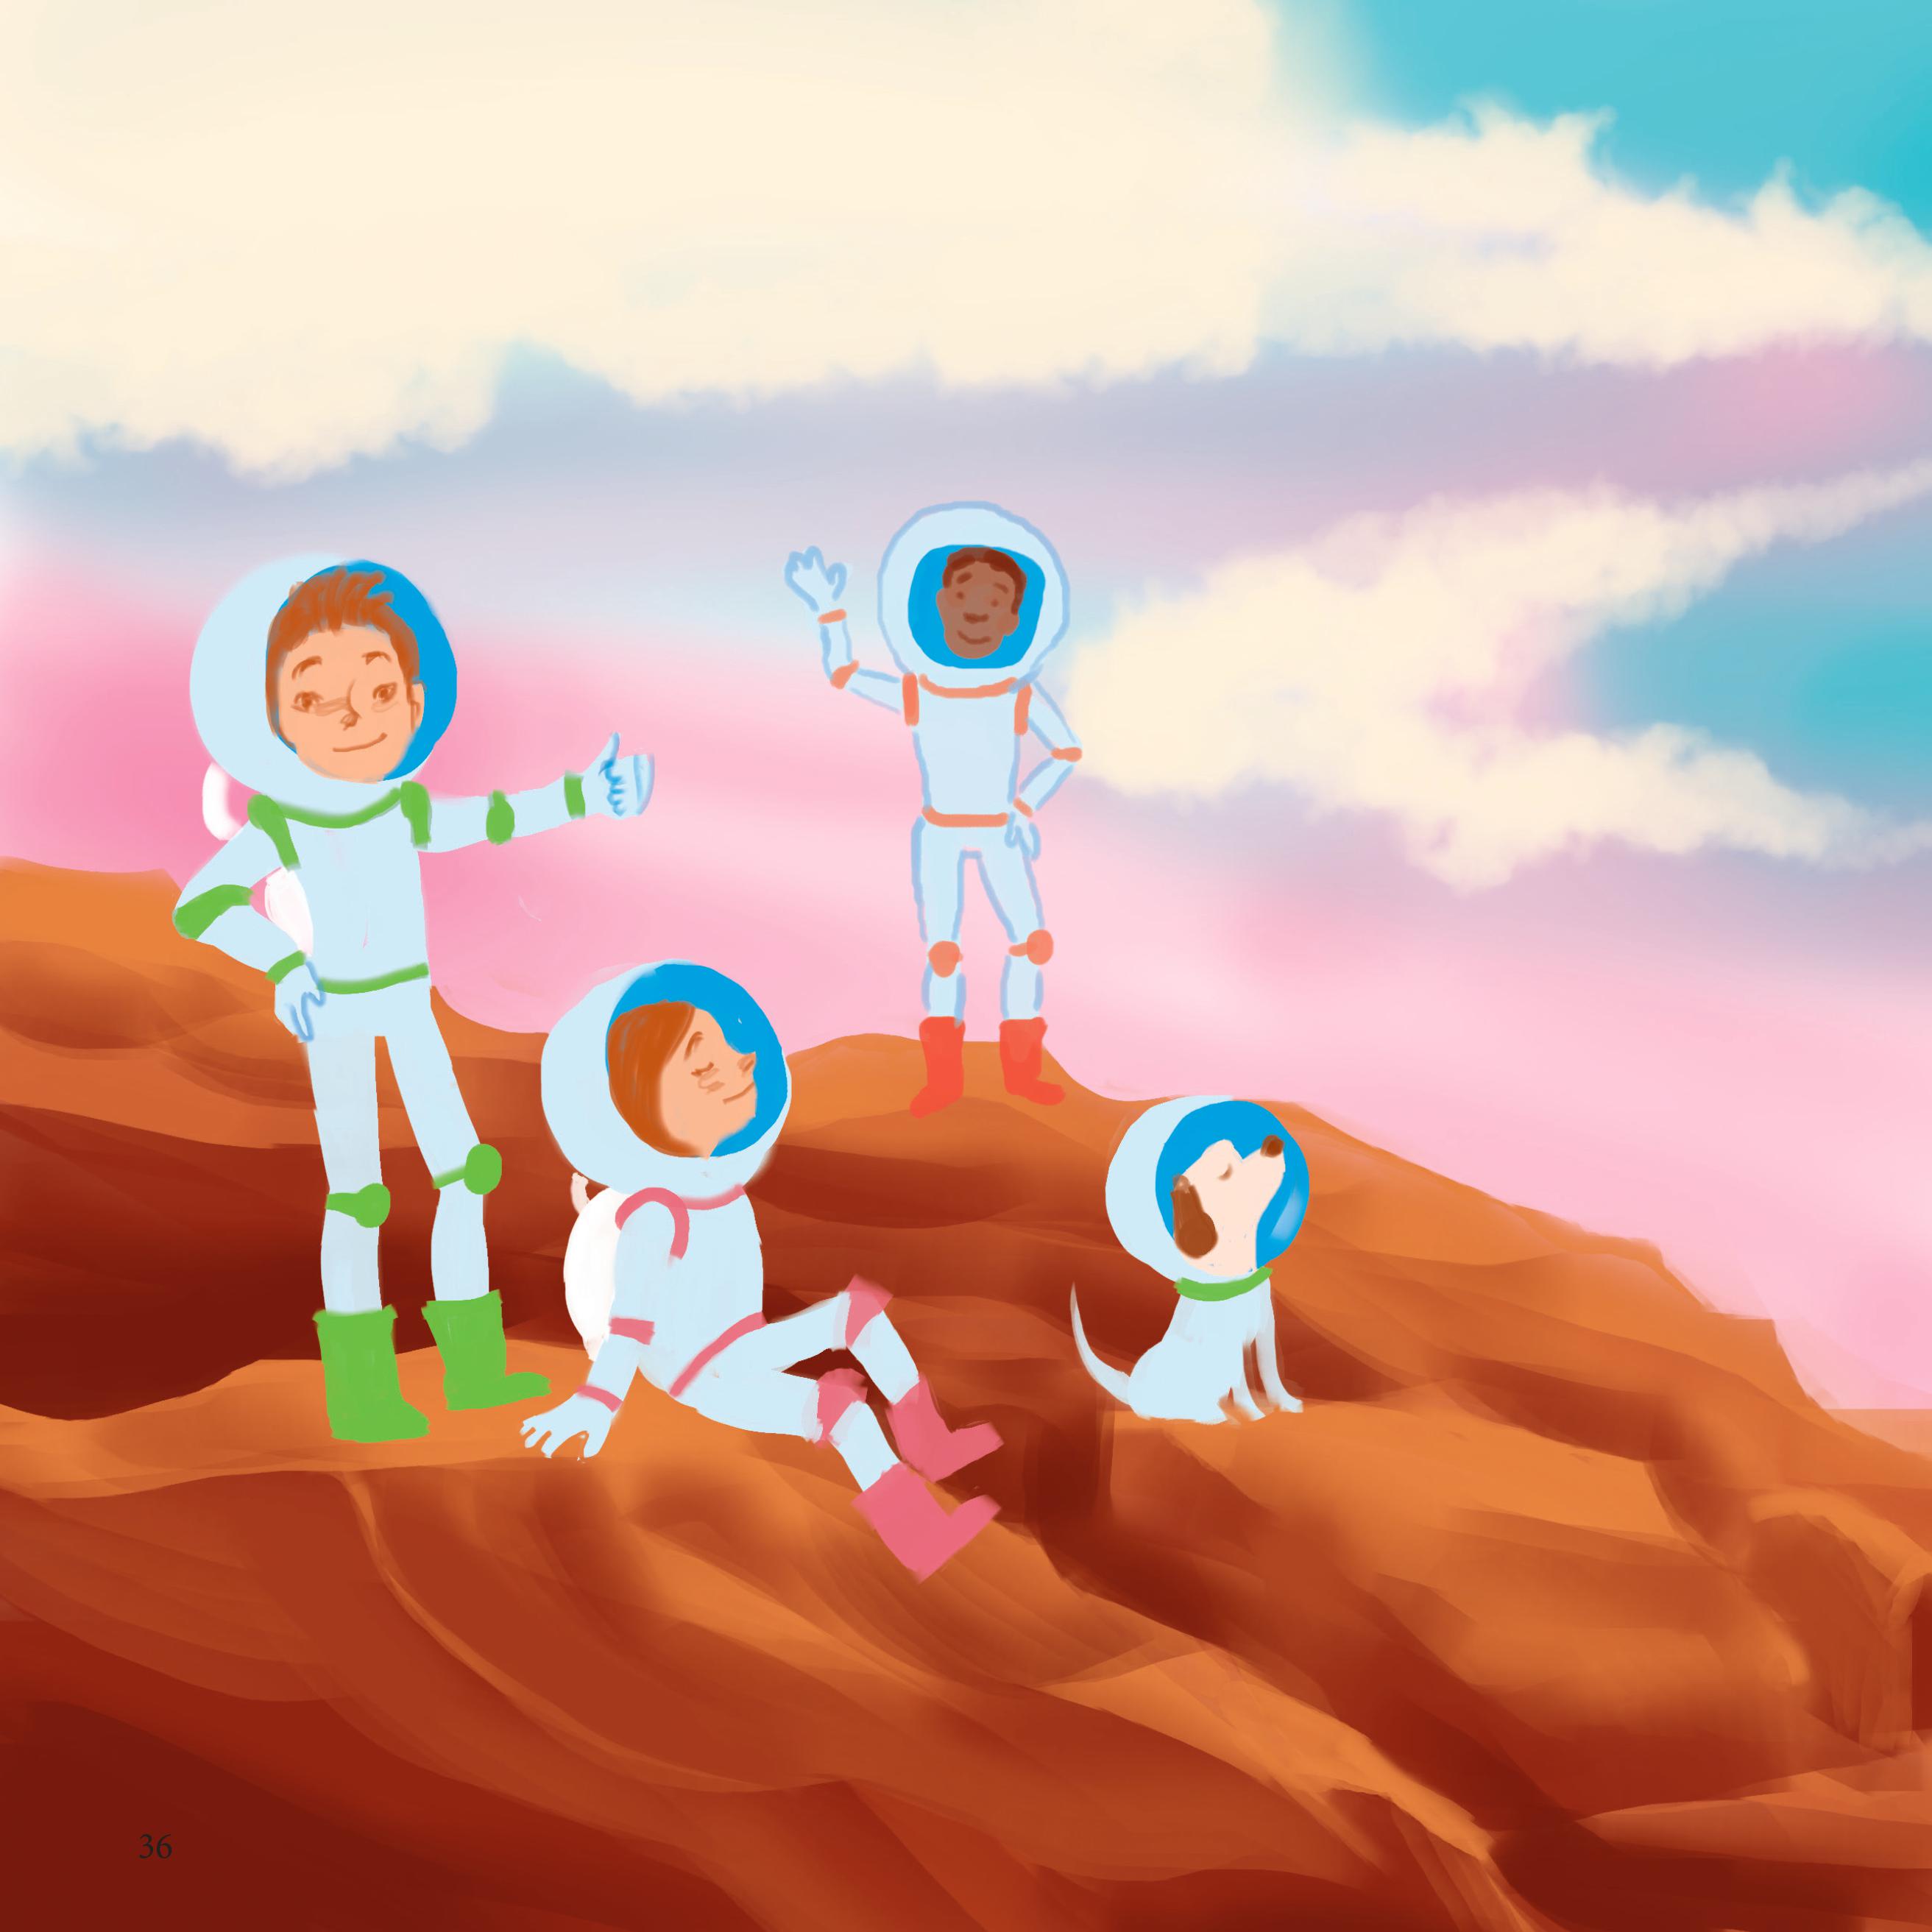 If You Were Me and Lived On Mars Illustration